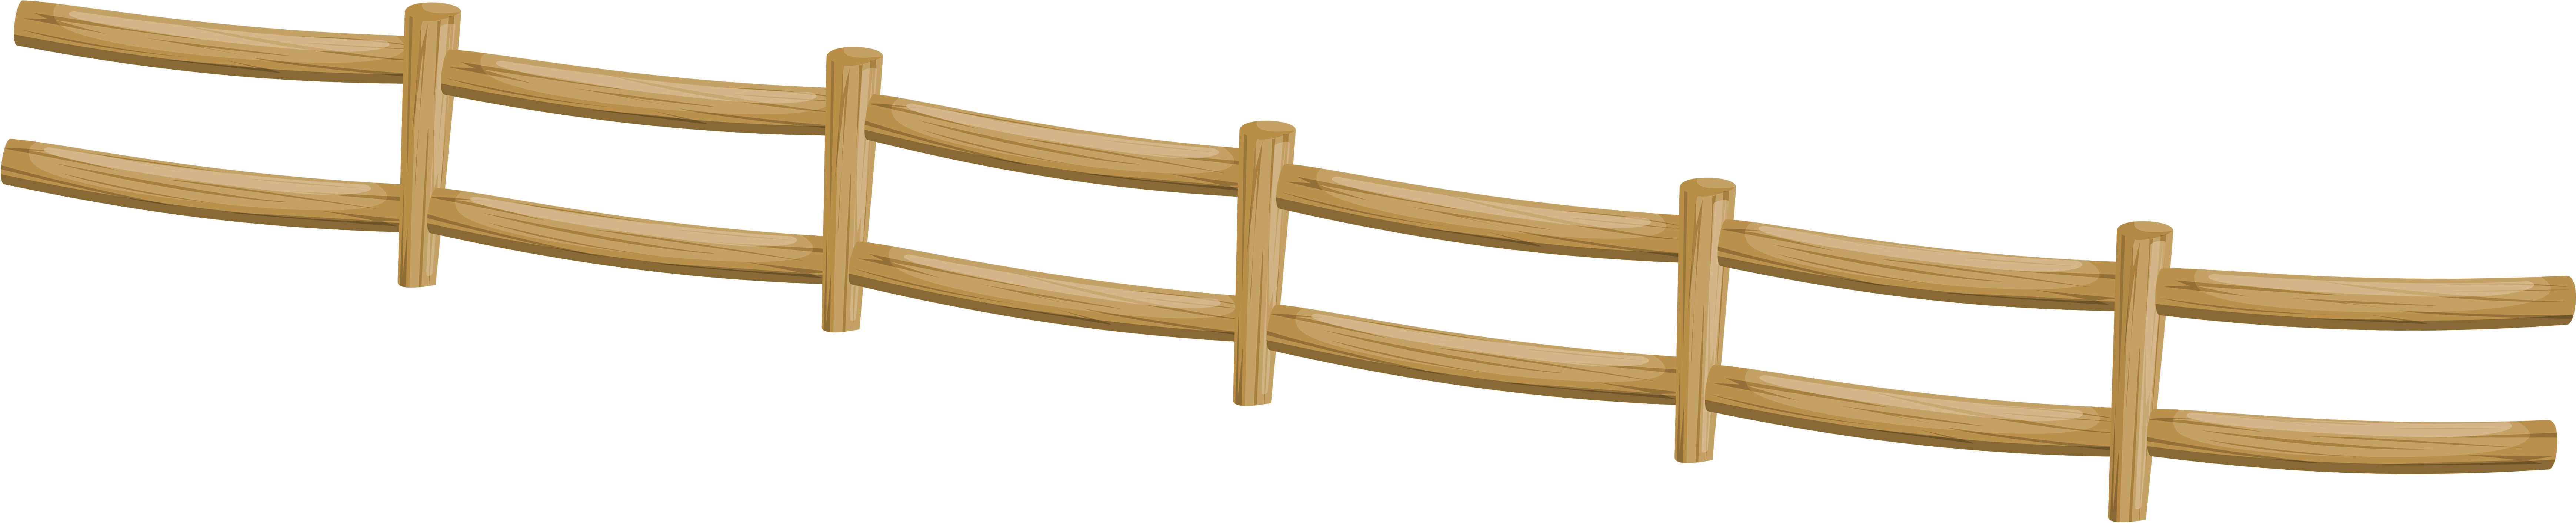 Wooden Fence PNG HQ Pic